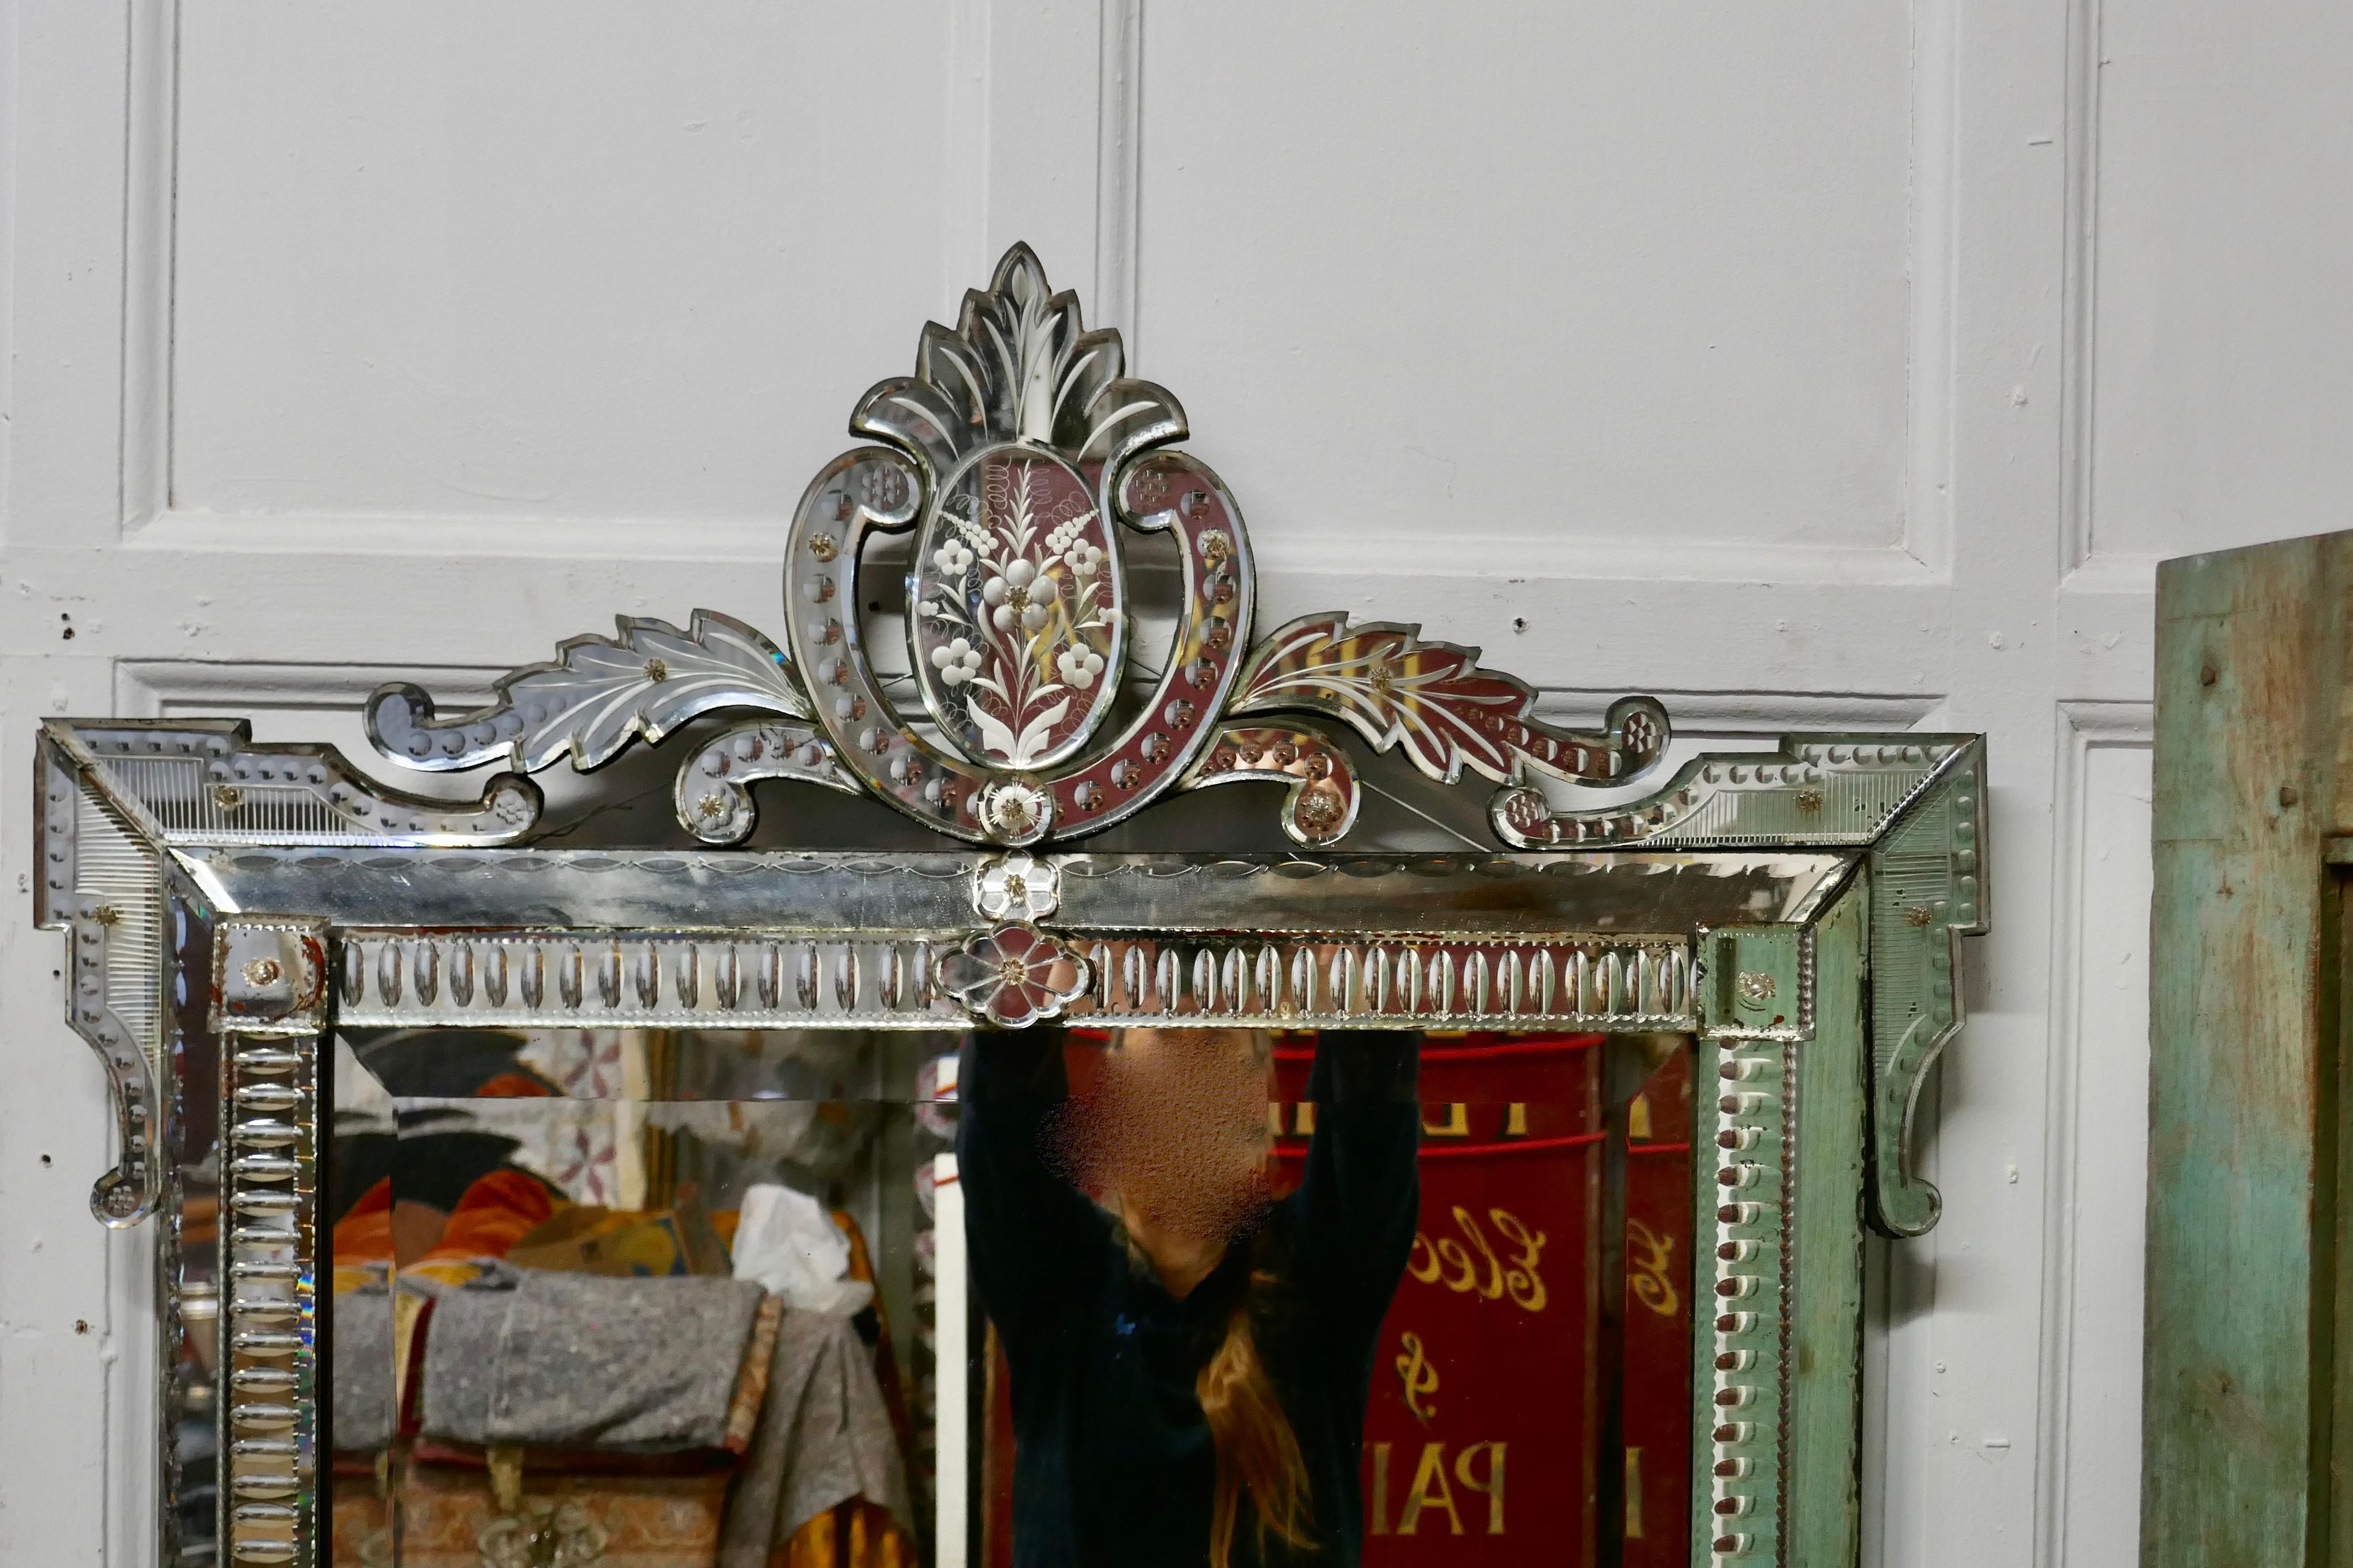 Superb large 19th century venetian cushion mirror

This is the most outstanding piece, it is absolutely original, it has a rectangular shape and a floral theme to the decoration with an elegant leafy cornice and angular detail to the